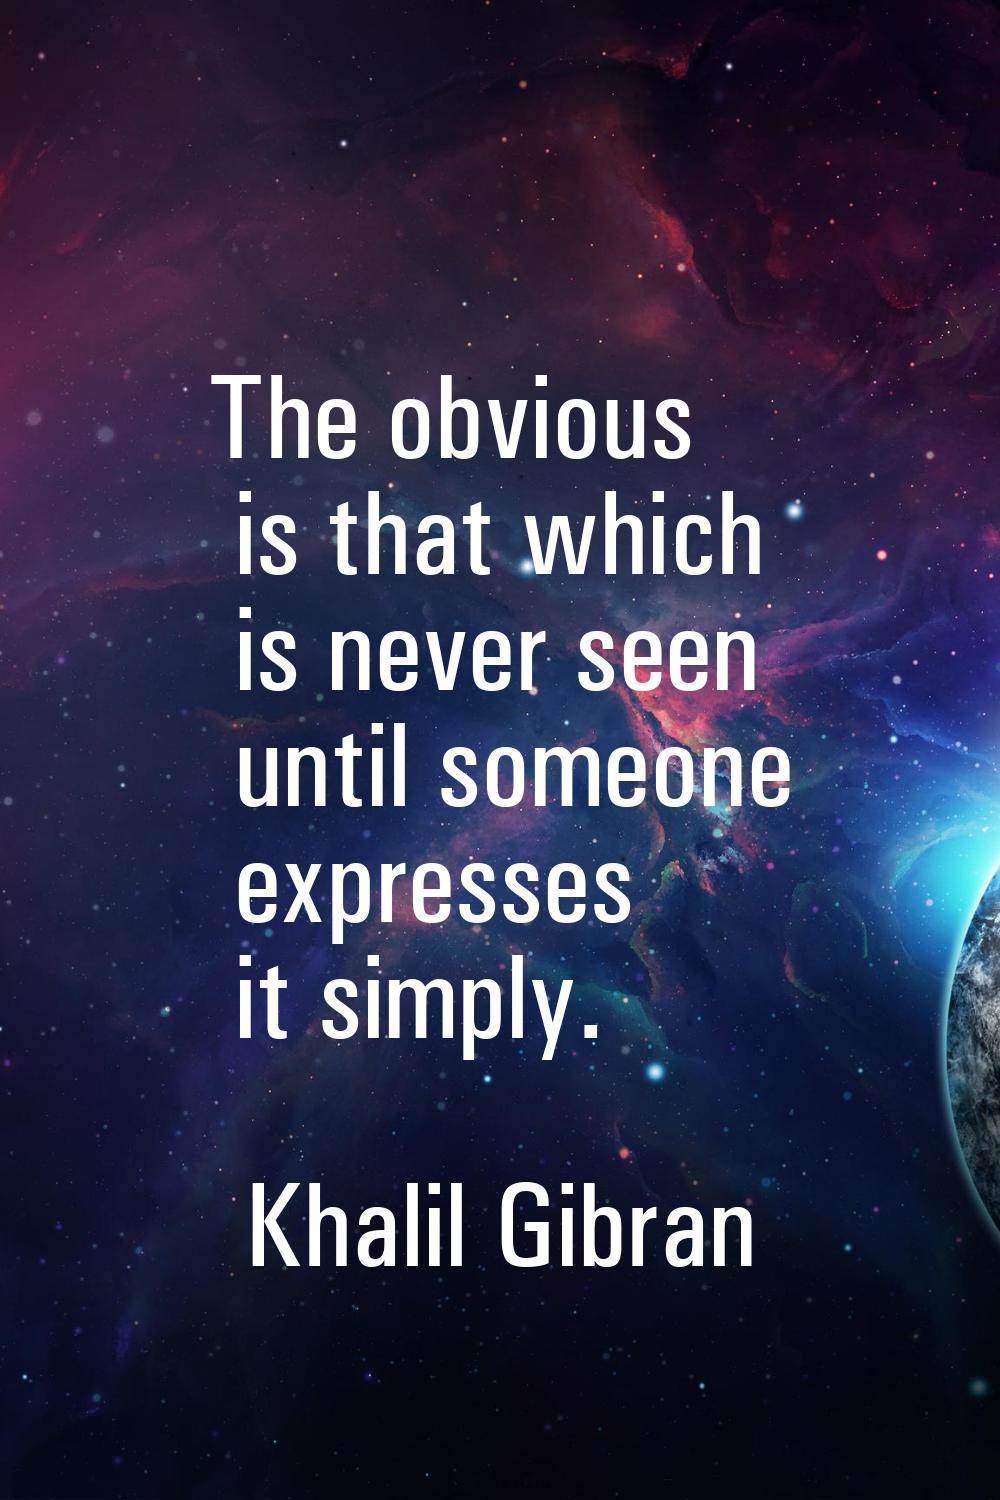 The obvious is that which is never seen until someone expresses it simply.